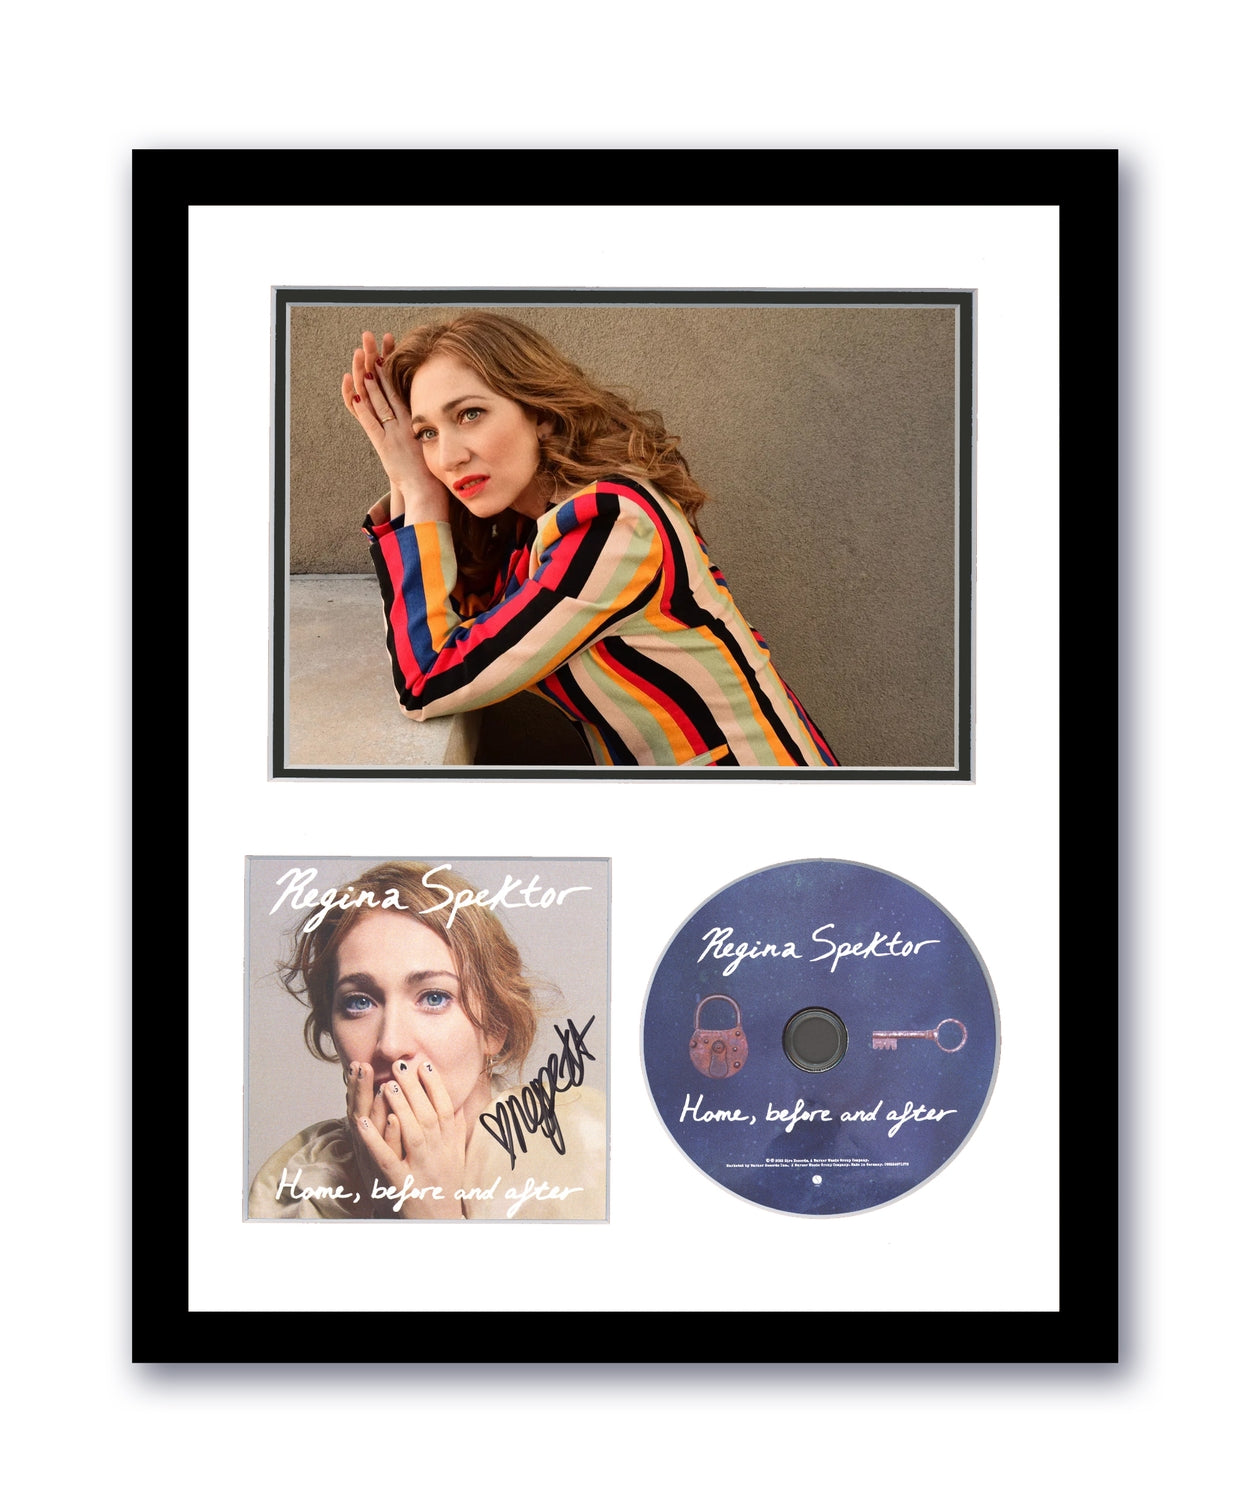 Regina Spektor Signed 11x14 Framed CD Home, before and after Autographed ACOA 2